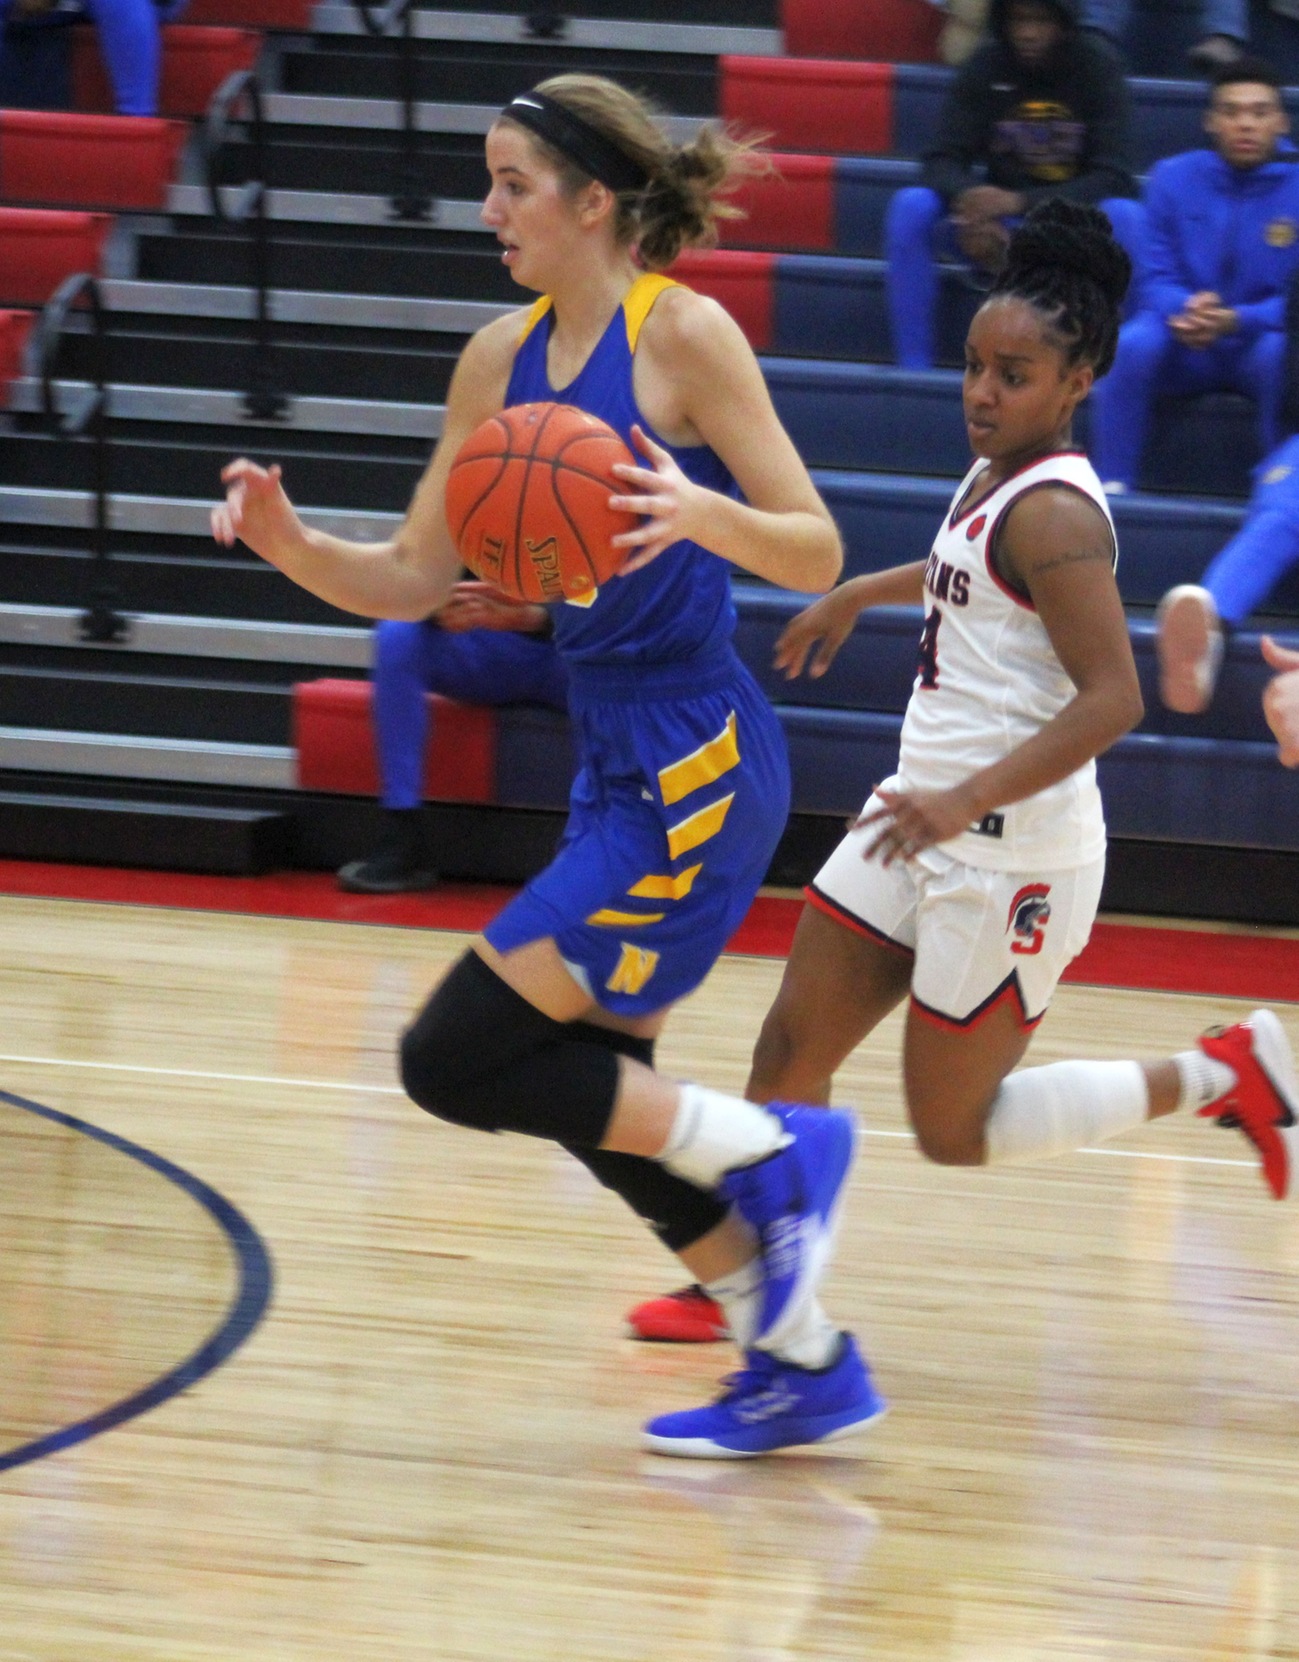 NIACC's Abby Leach drives to the basket during Wednesday's game at Southwestern.